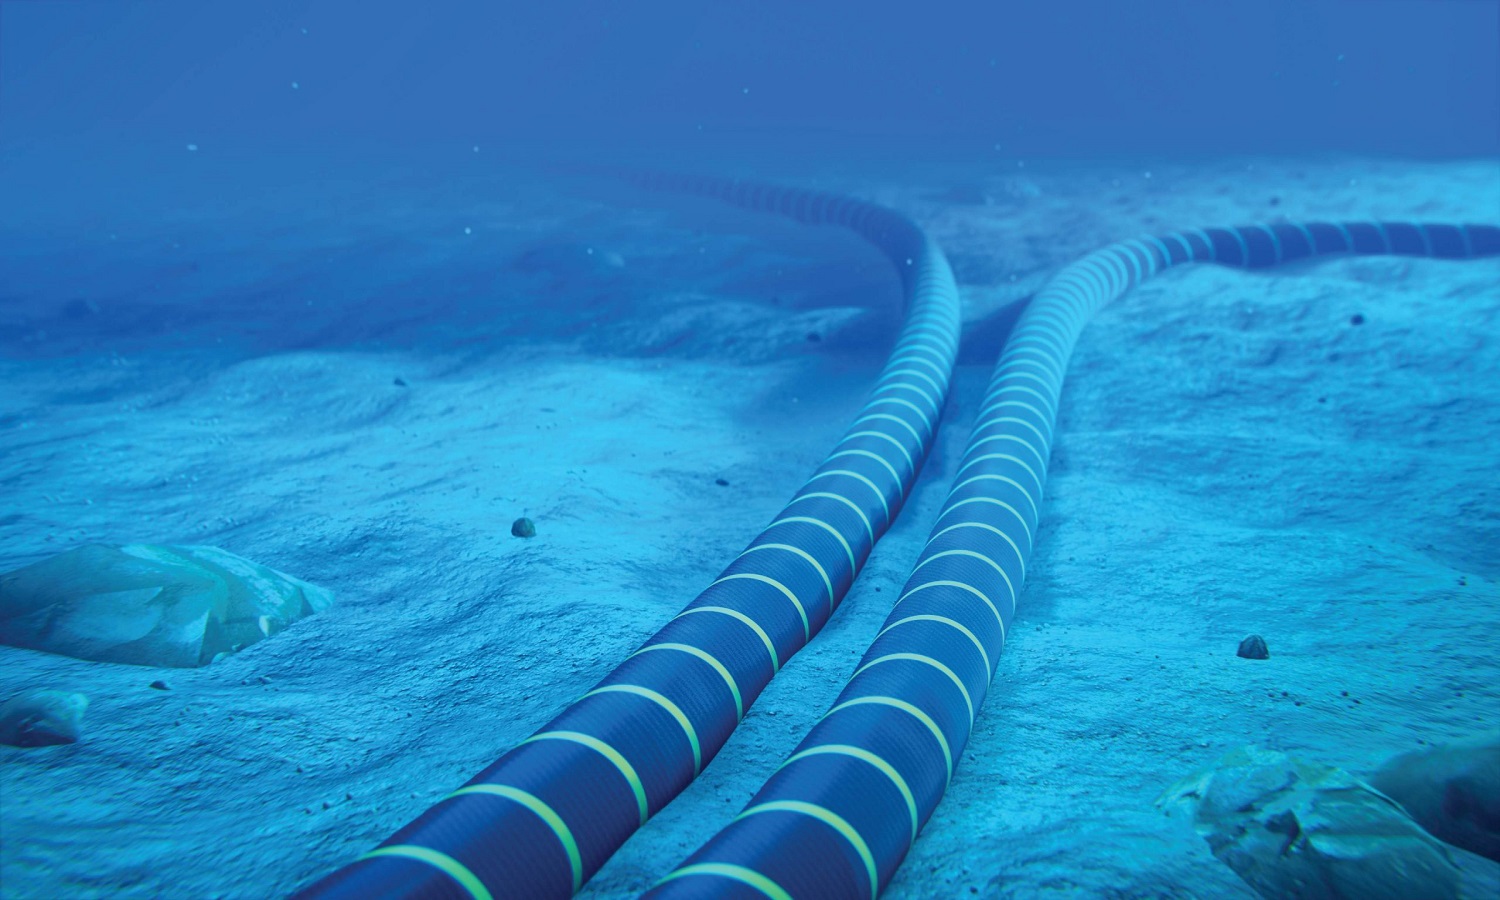 Egypt, Greece to carry out feasibility studies for underwater electricity interconnection project